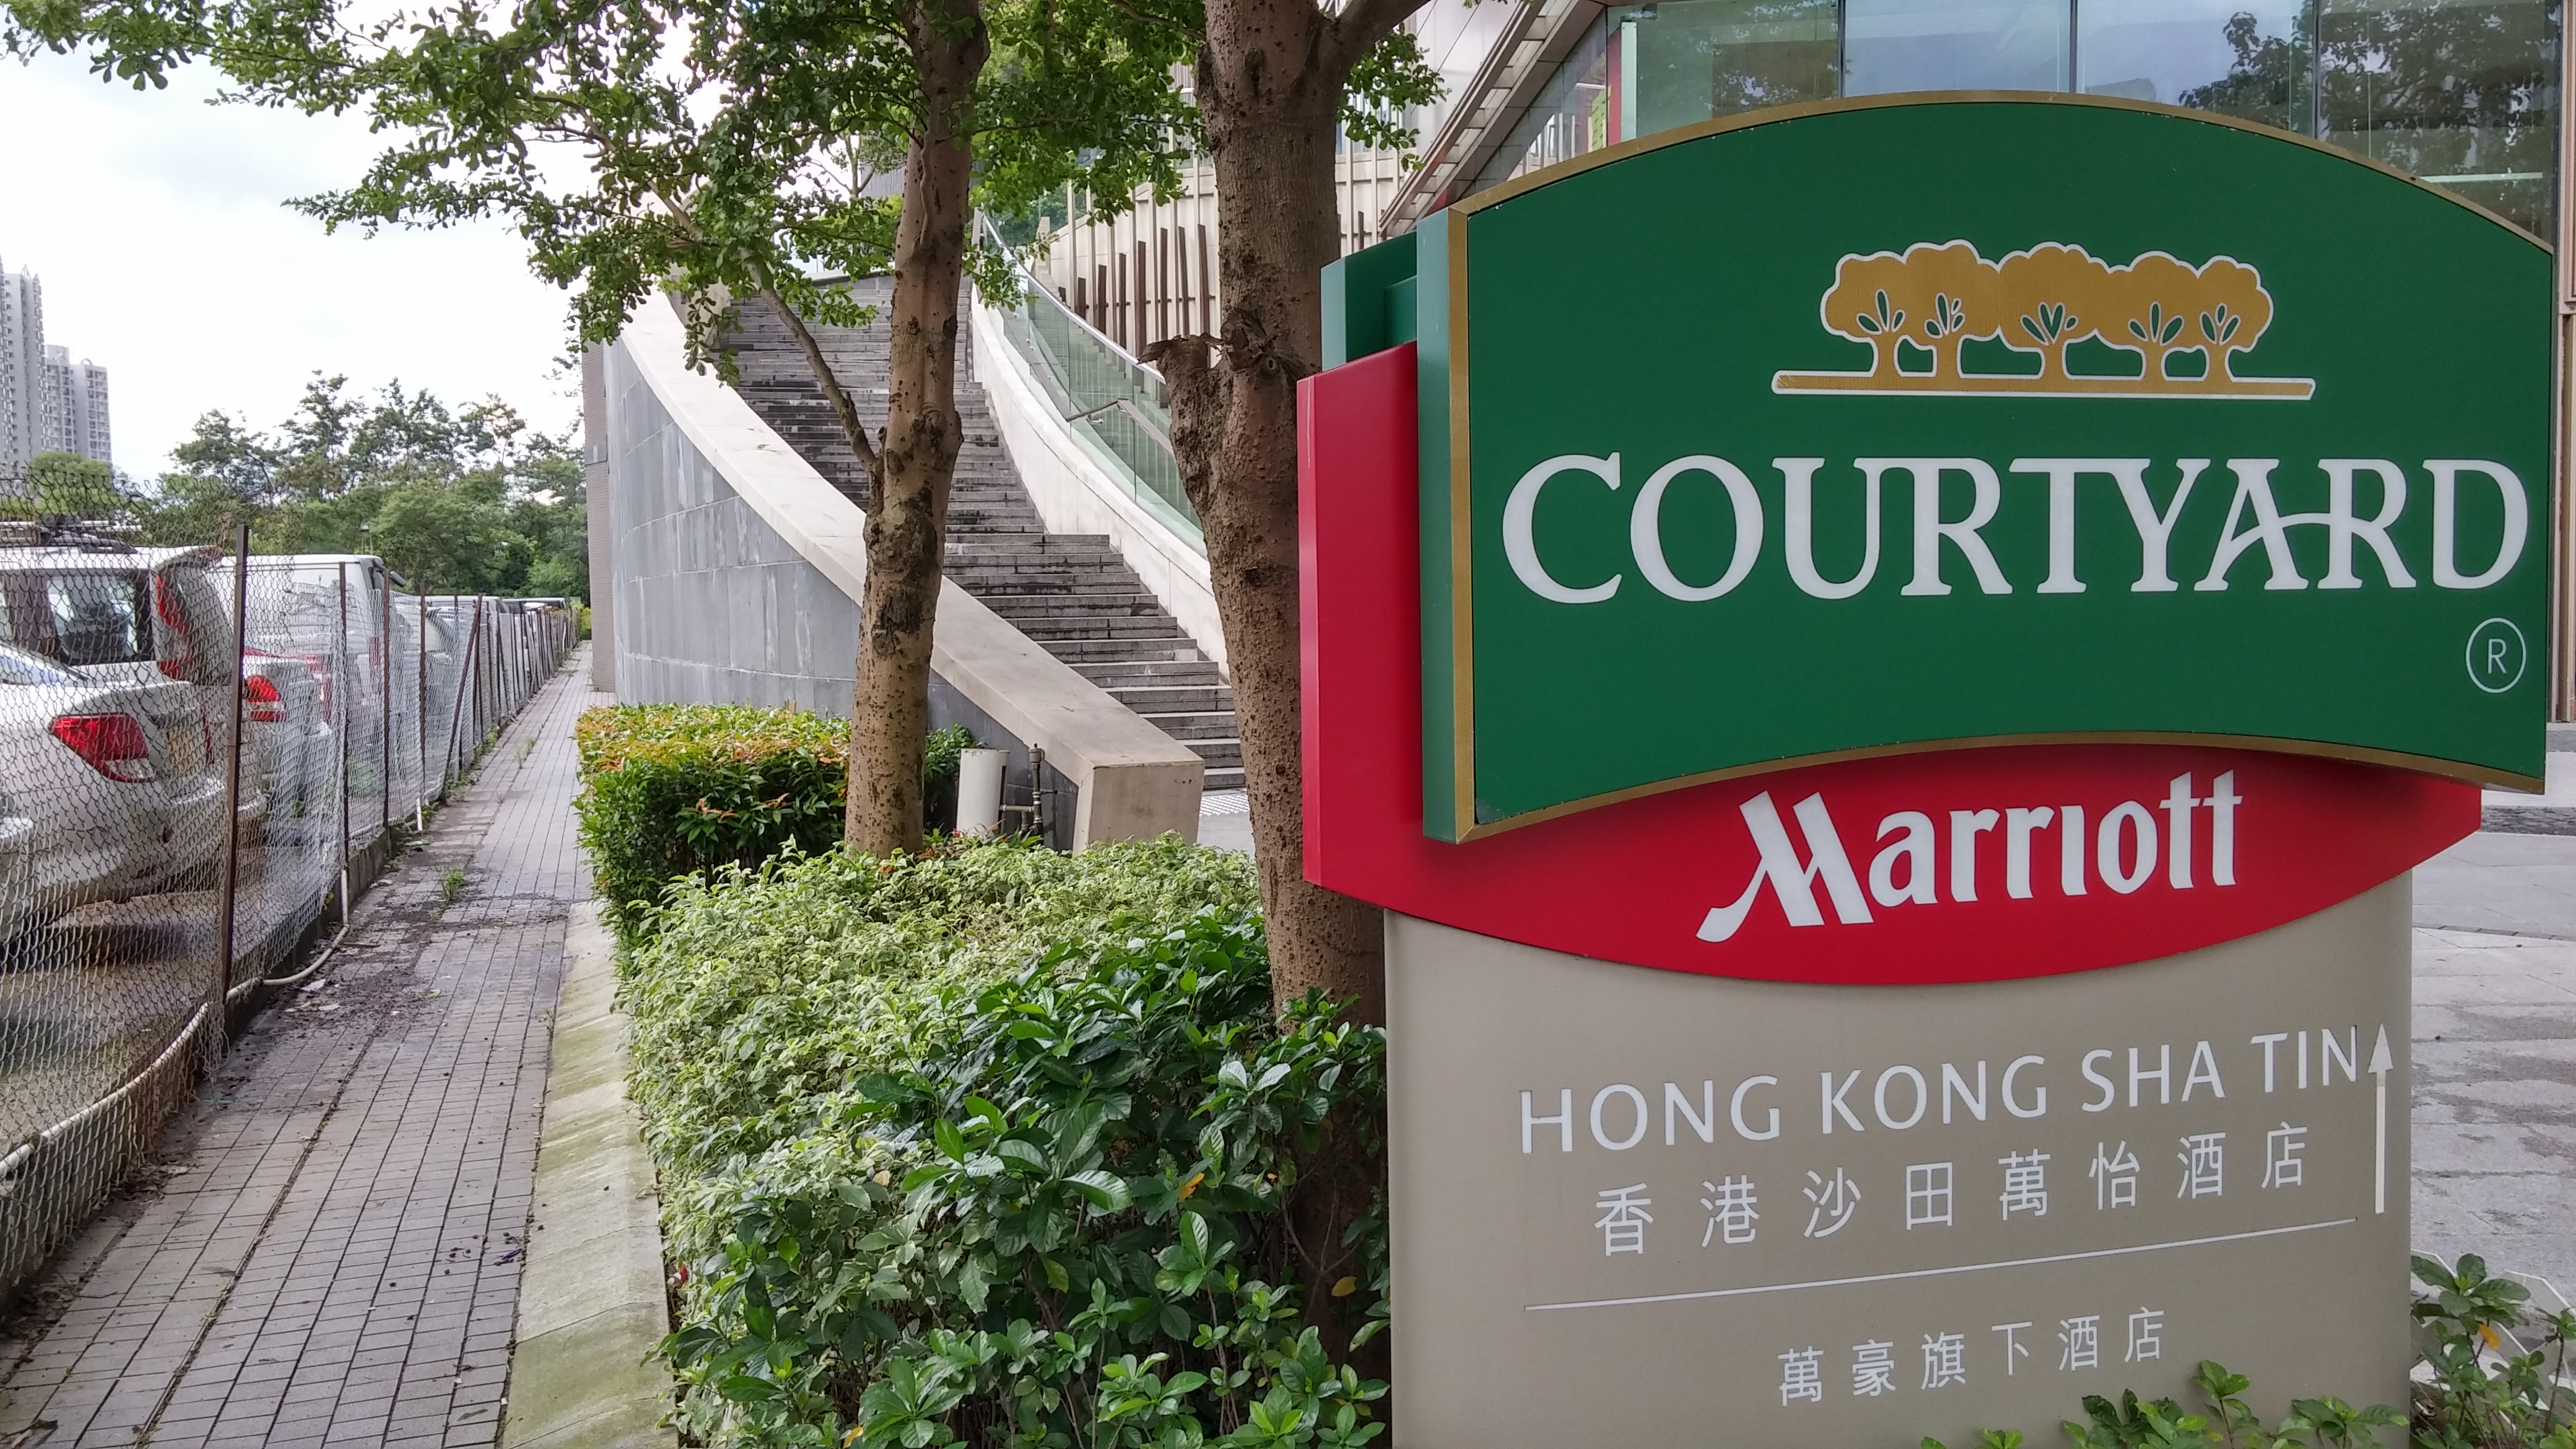 Courtyard by Marriott Hong Kong Sha Tin is good for businessmen, not for travelers